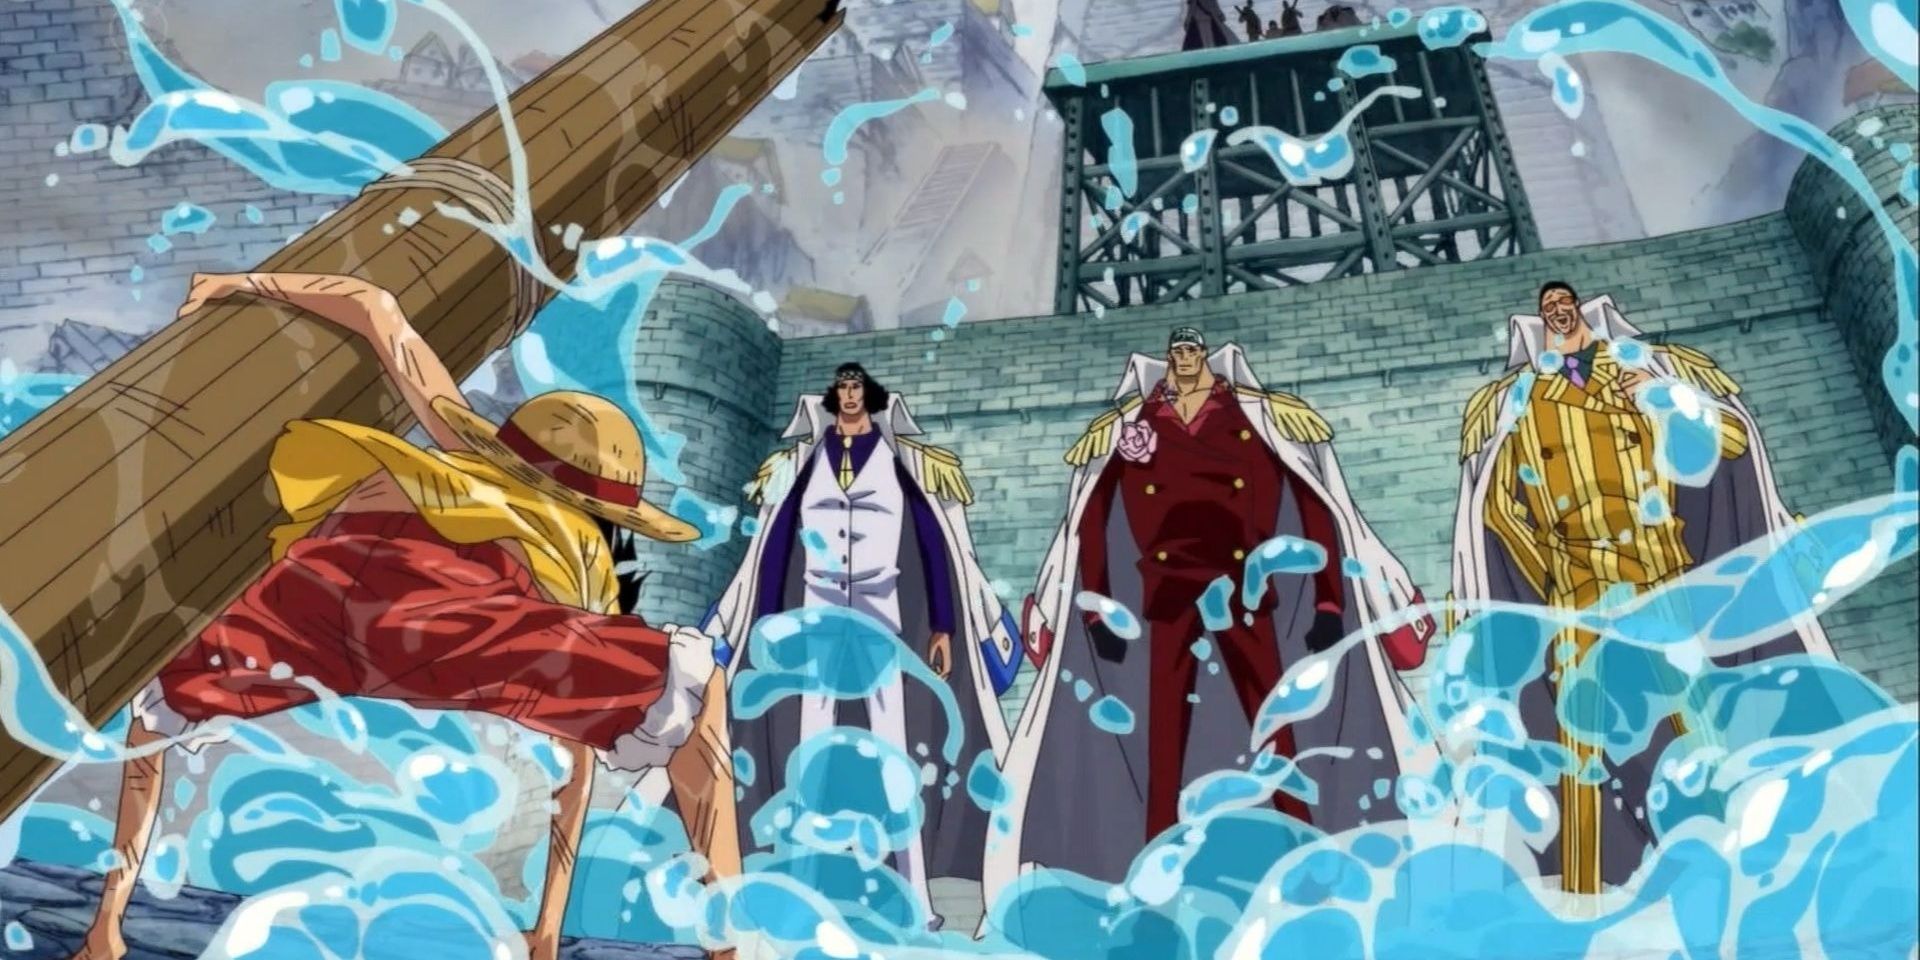 Luffy faces three admirals at Marineford in One Piece.